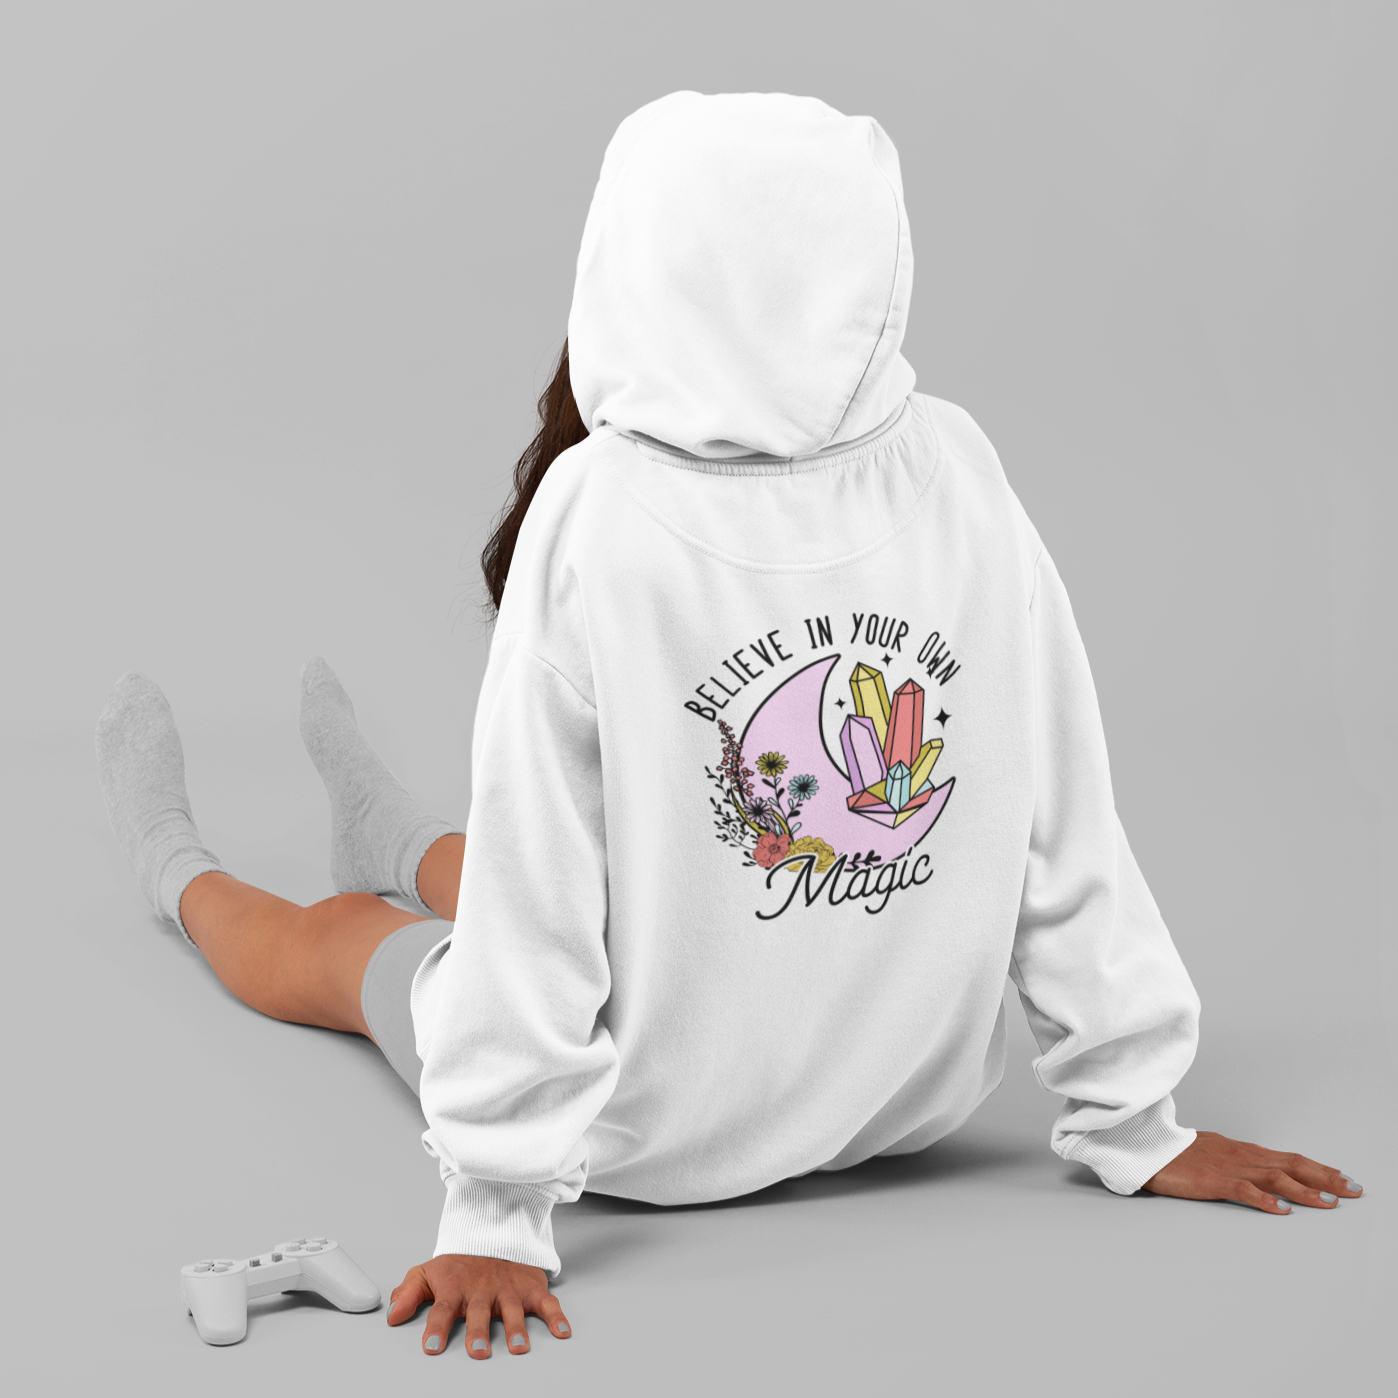 Believe in Your Magic  -  Full Color Heat Transfer